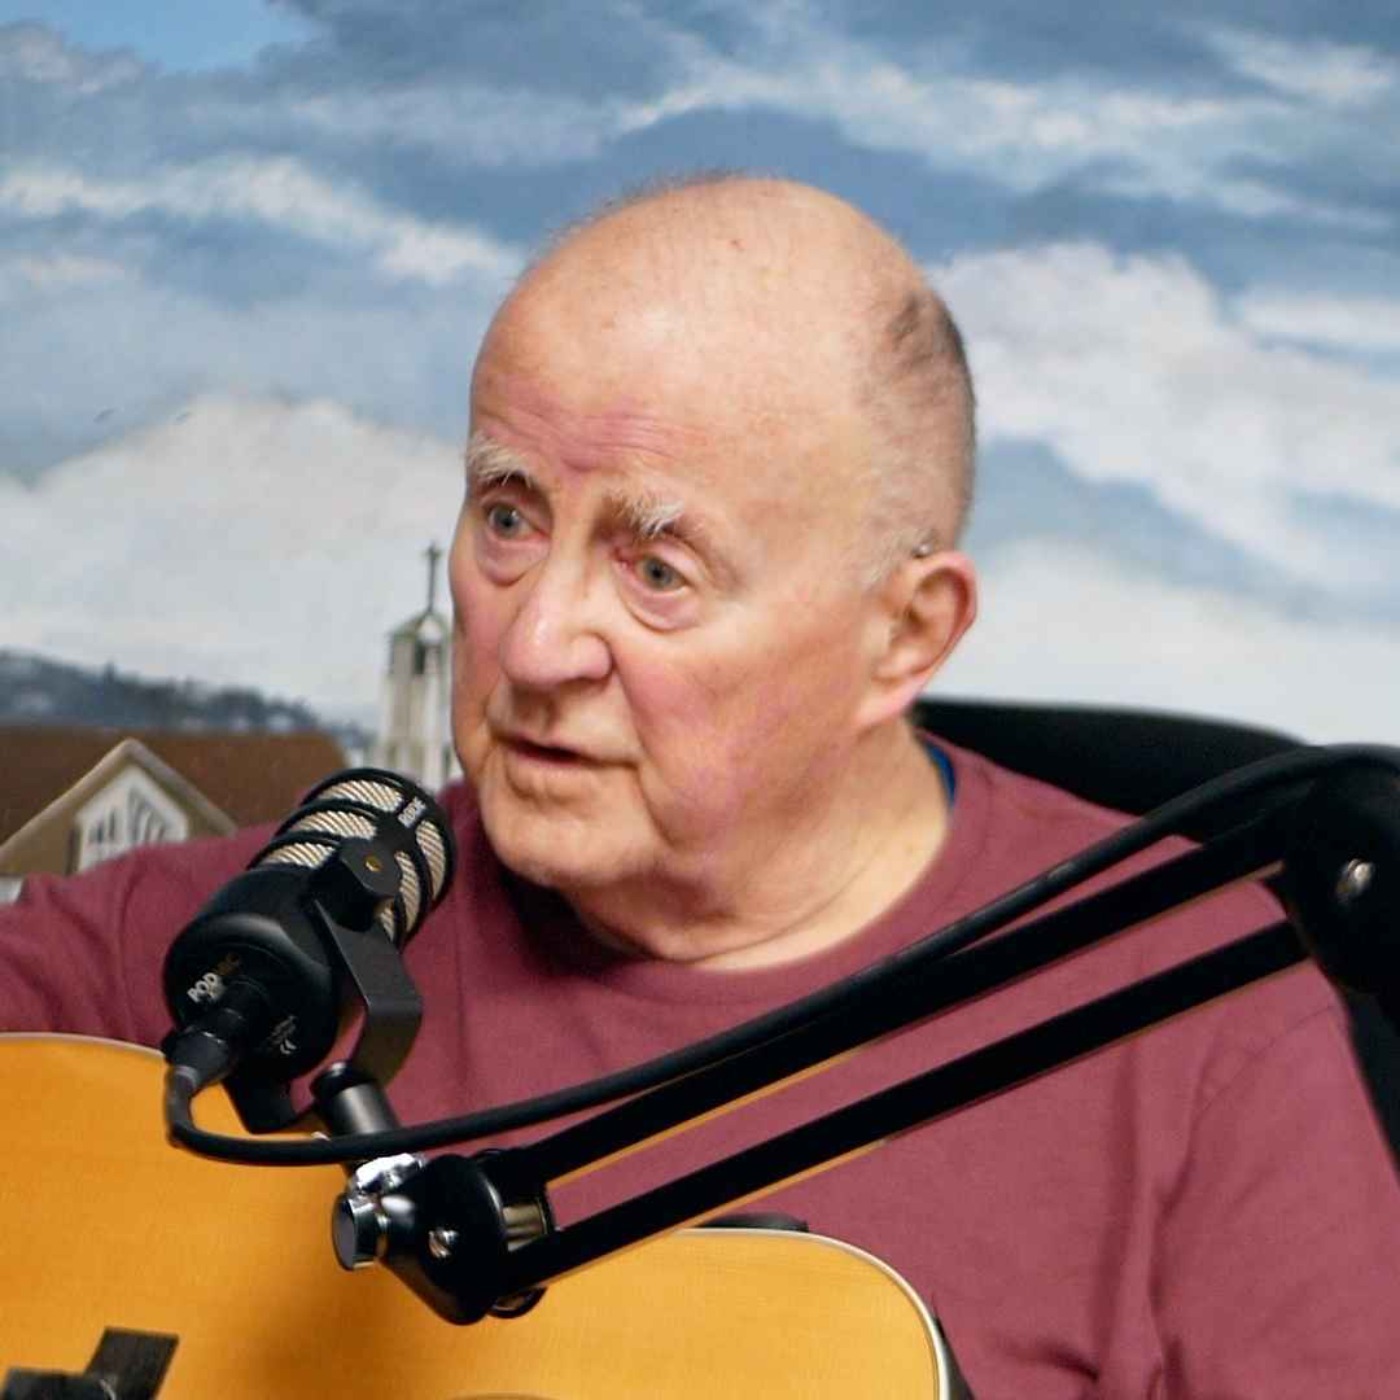 #141 The legendary Christy Moore joins us in studio to speak about addiction, recovery and music.